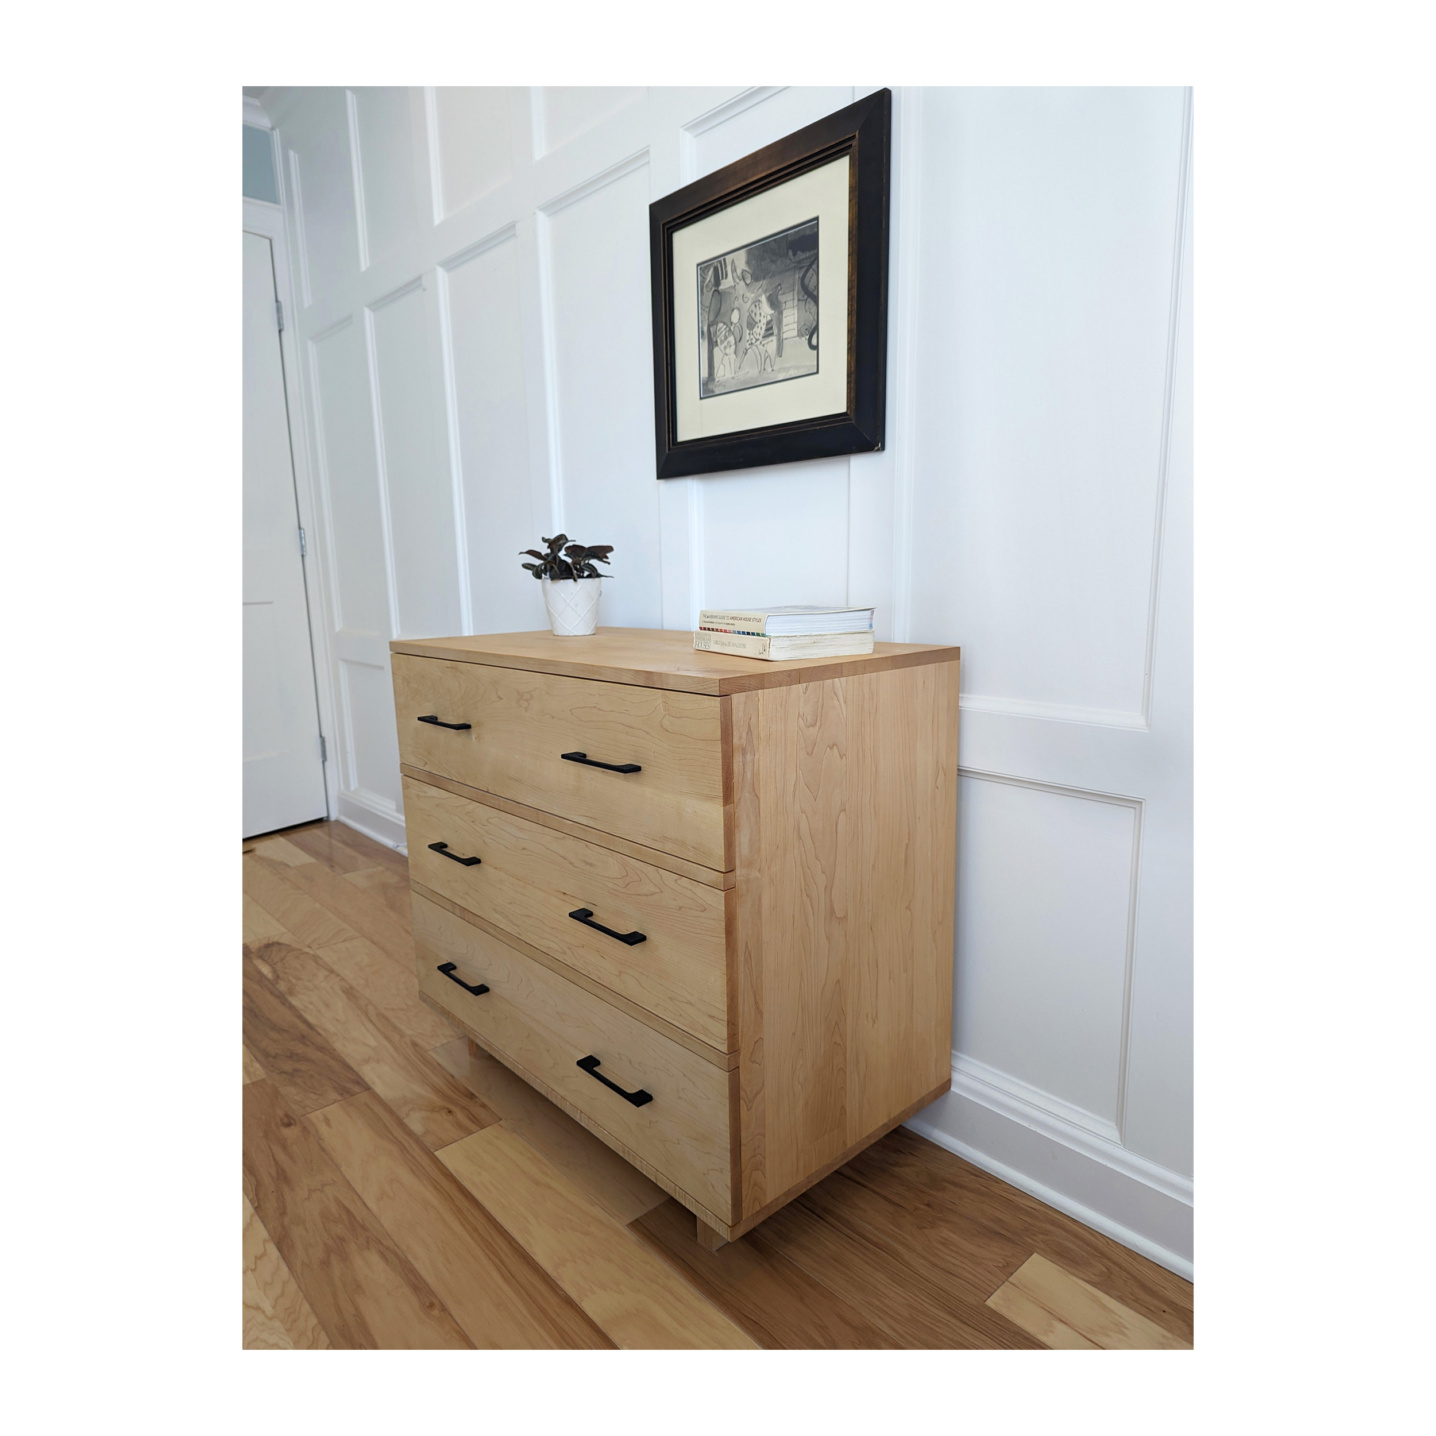 Nordic dresser locally made in maple wood